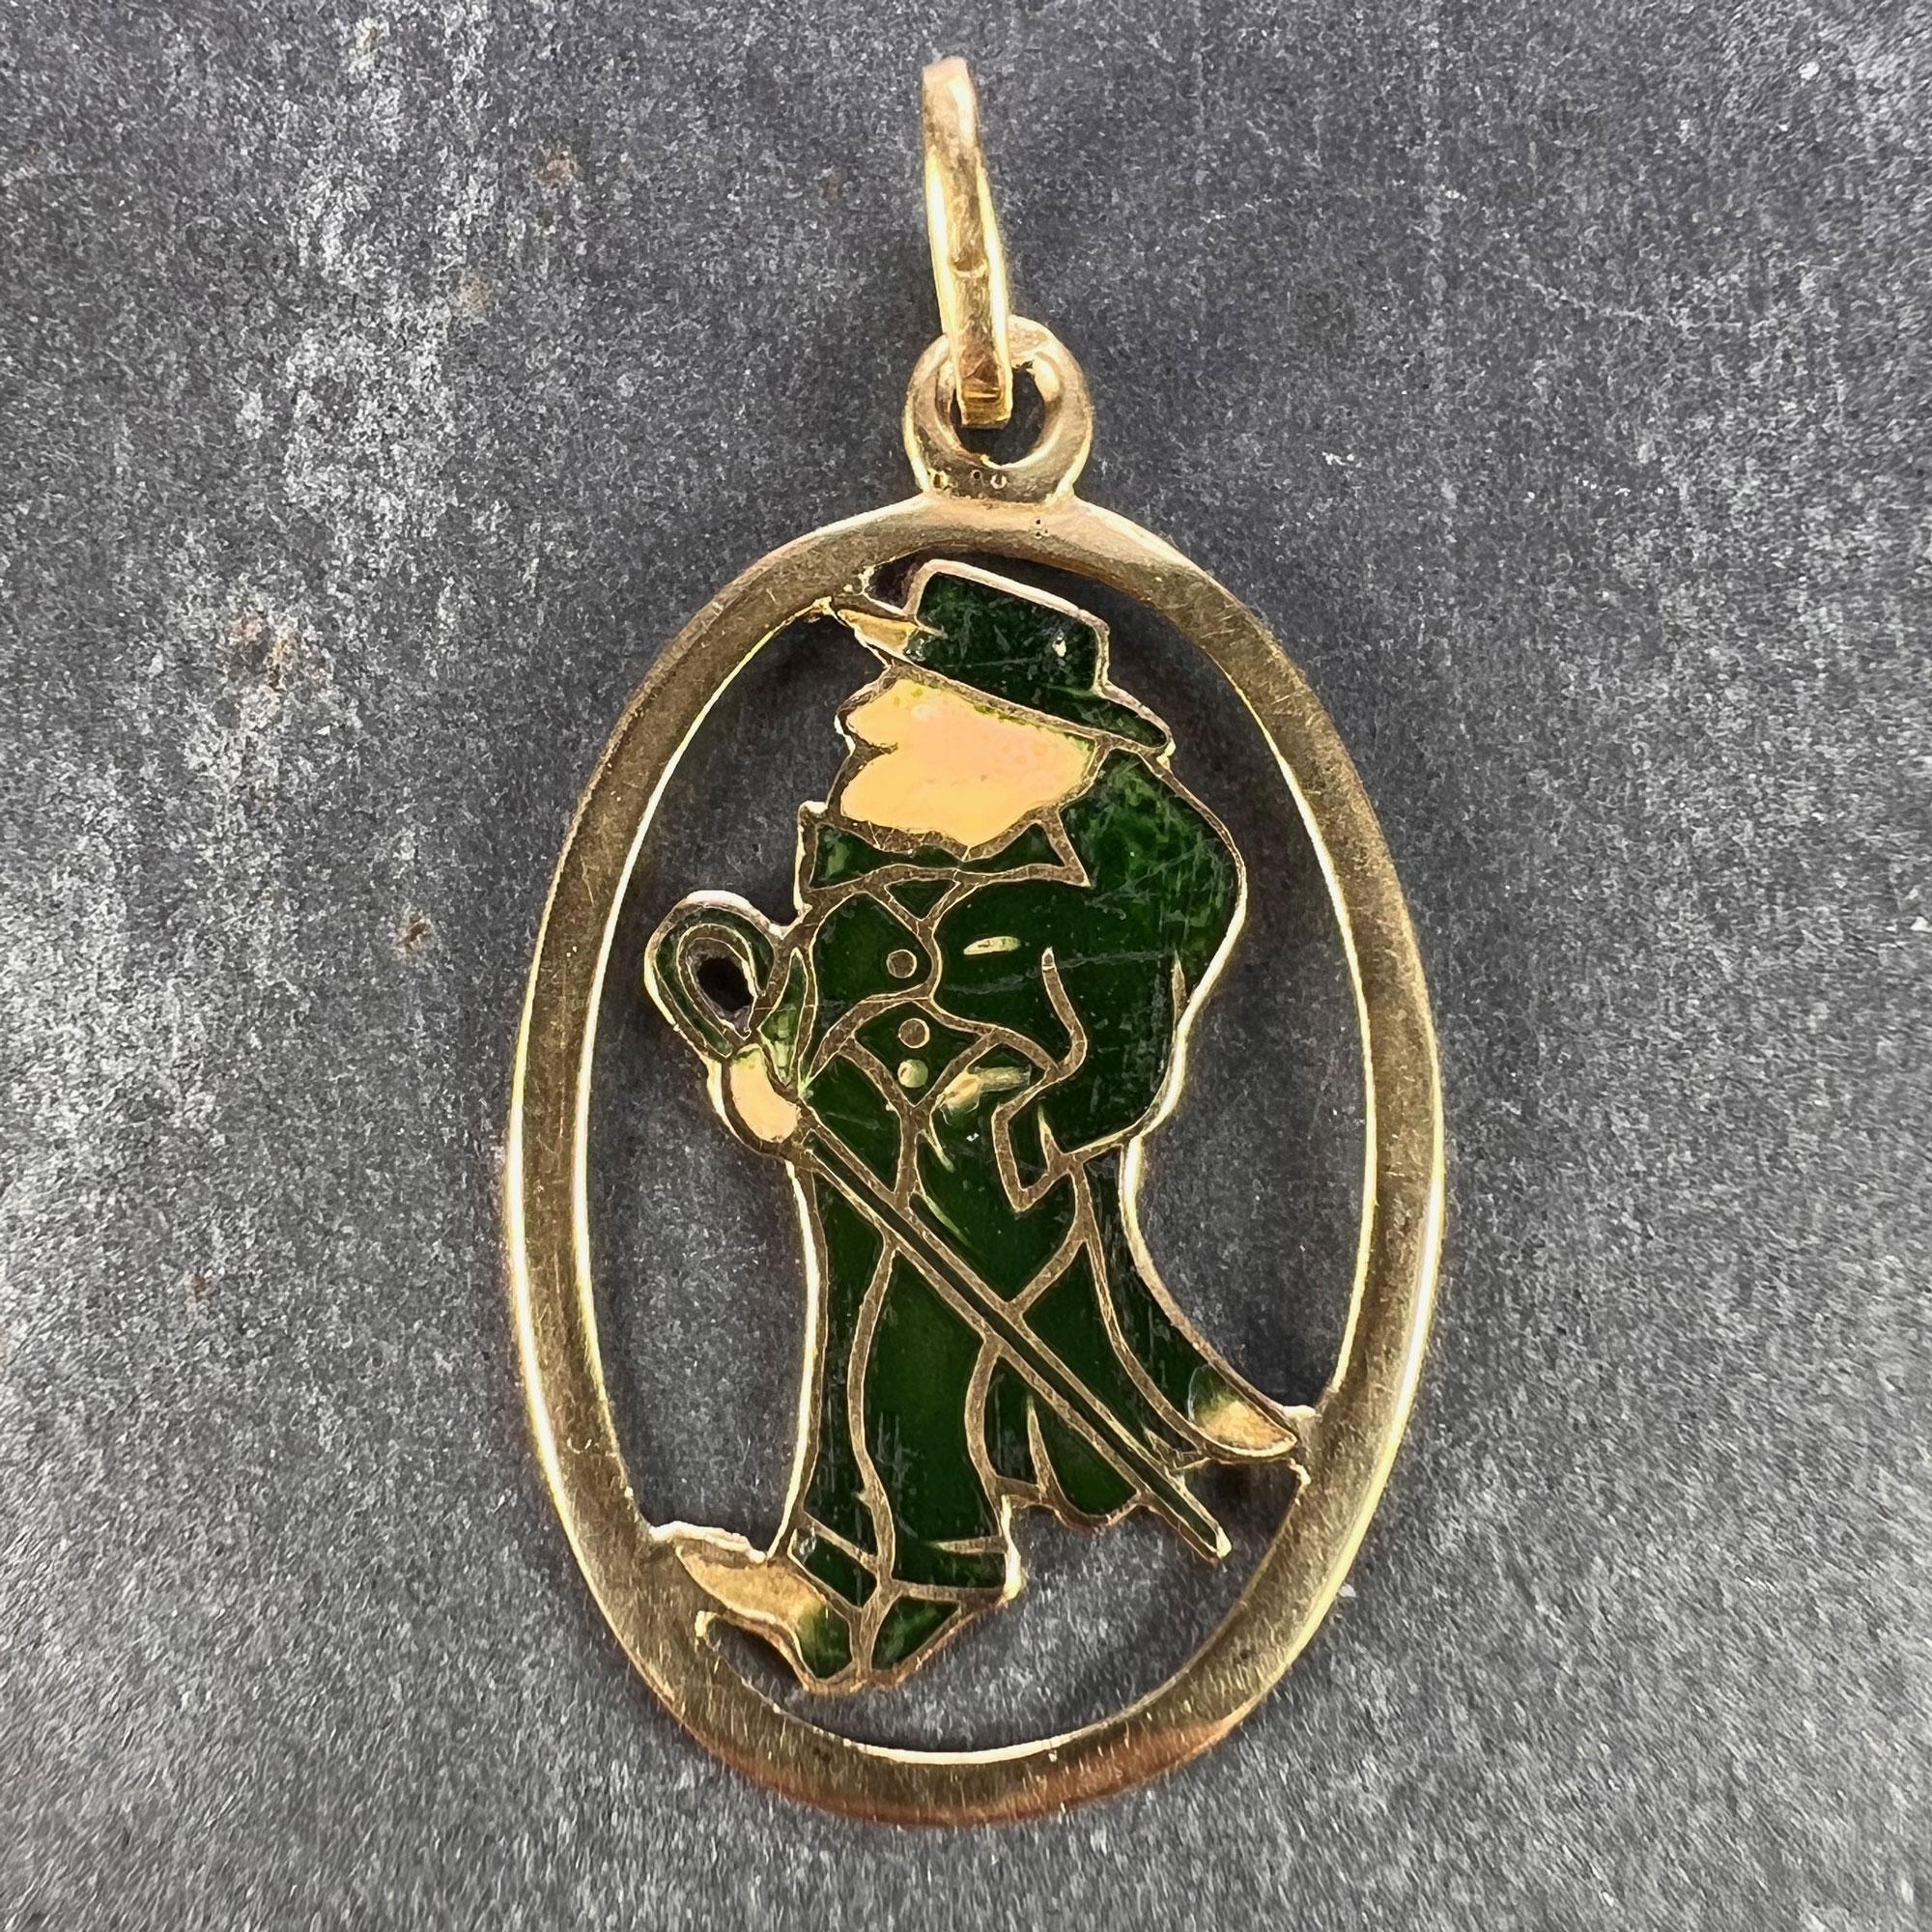 An 18 karat (18K) yellow gold charm pendant set with green and cream enamel designed as Saint Patrick of Ireland dressed as a man in a green suit with tailcoat, hat and cane. Stamped with the owl mark for 18 karat gold and French import and K18 to